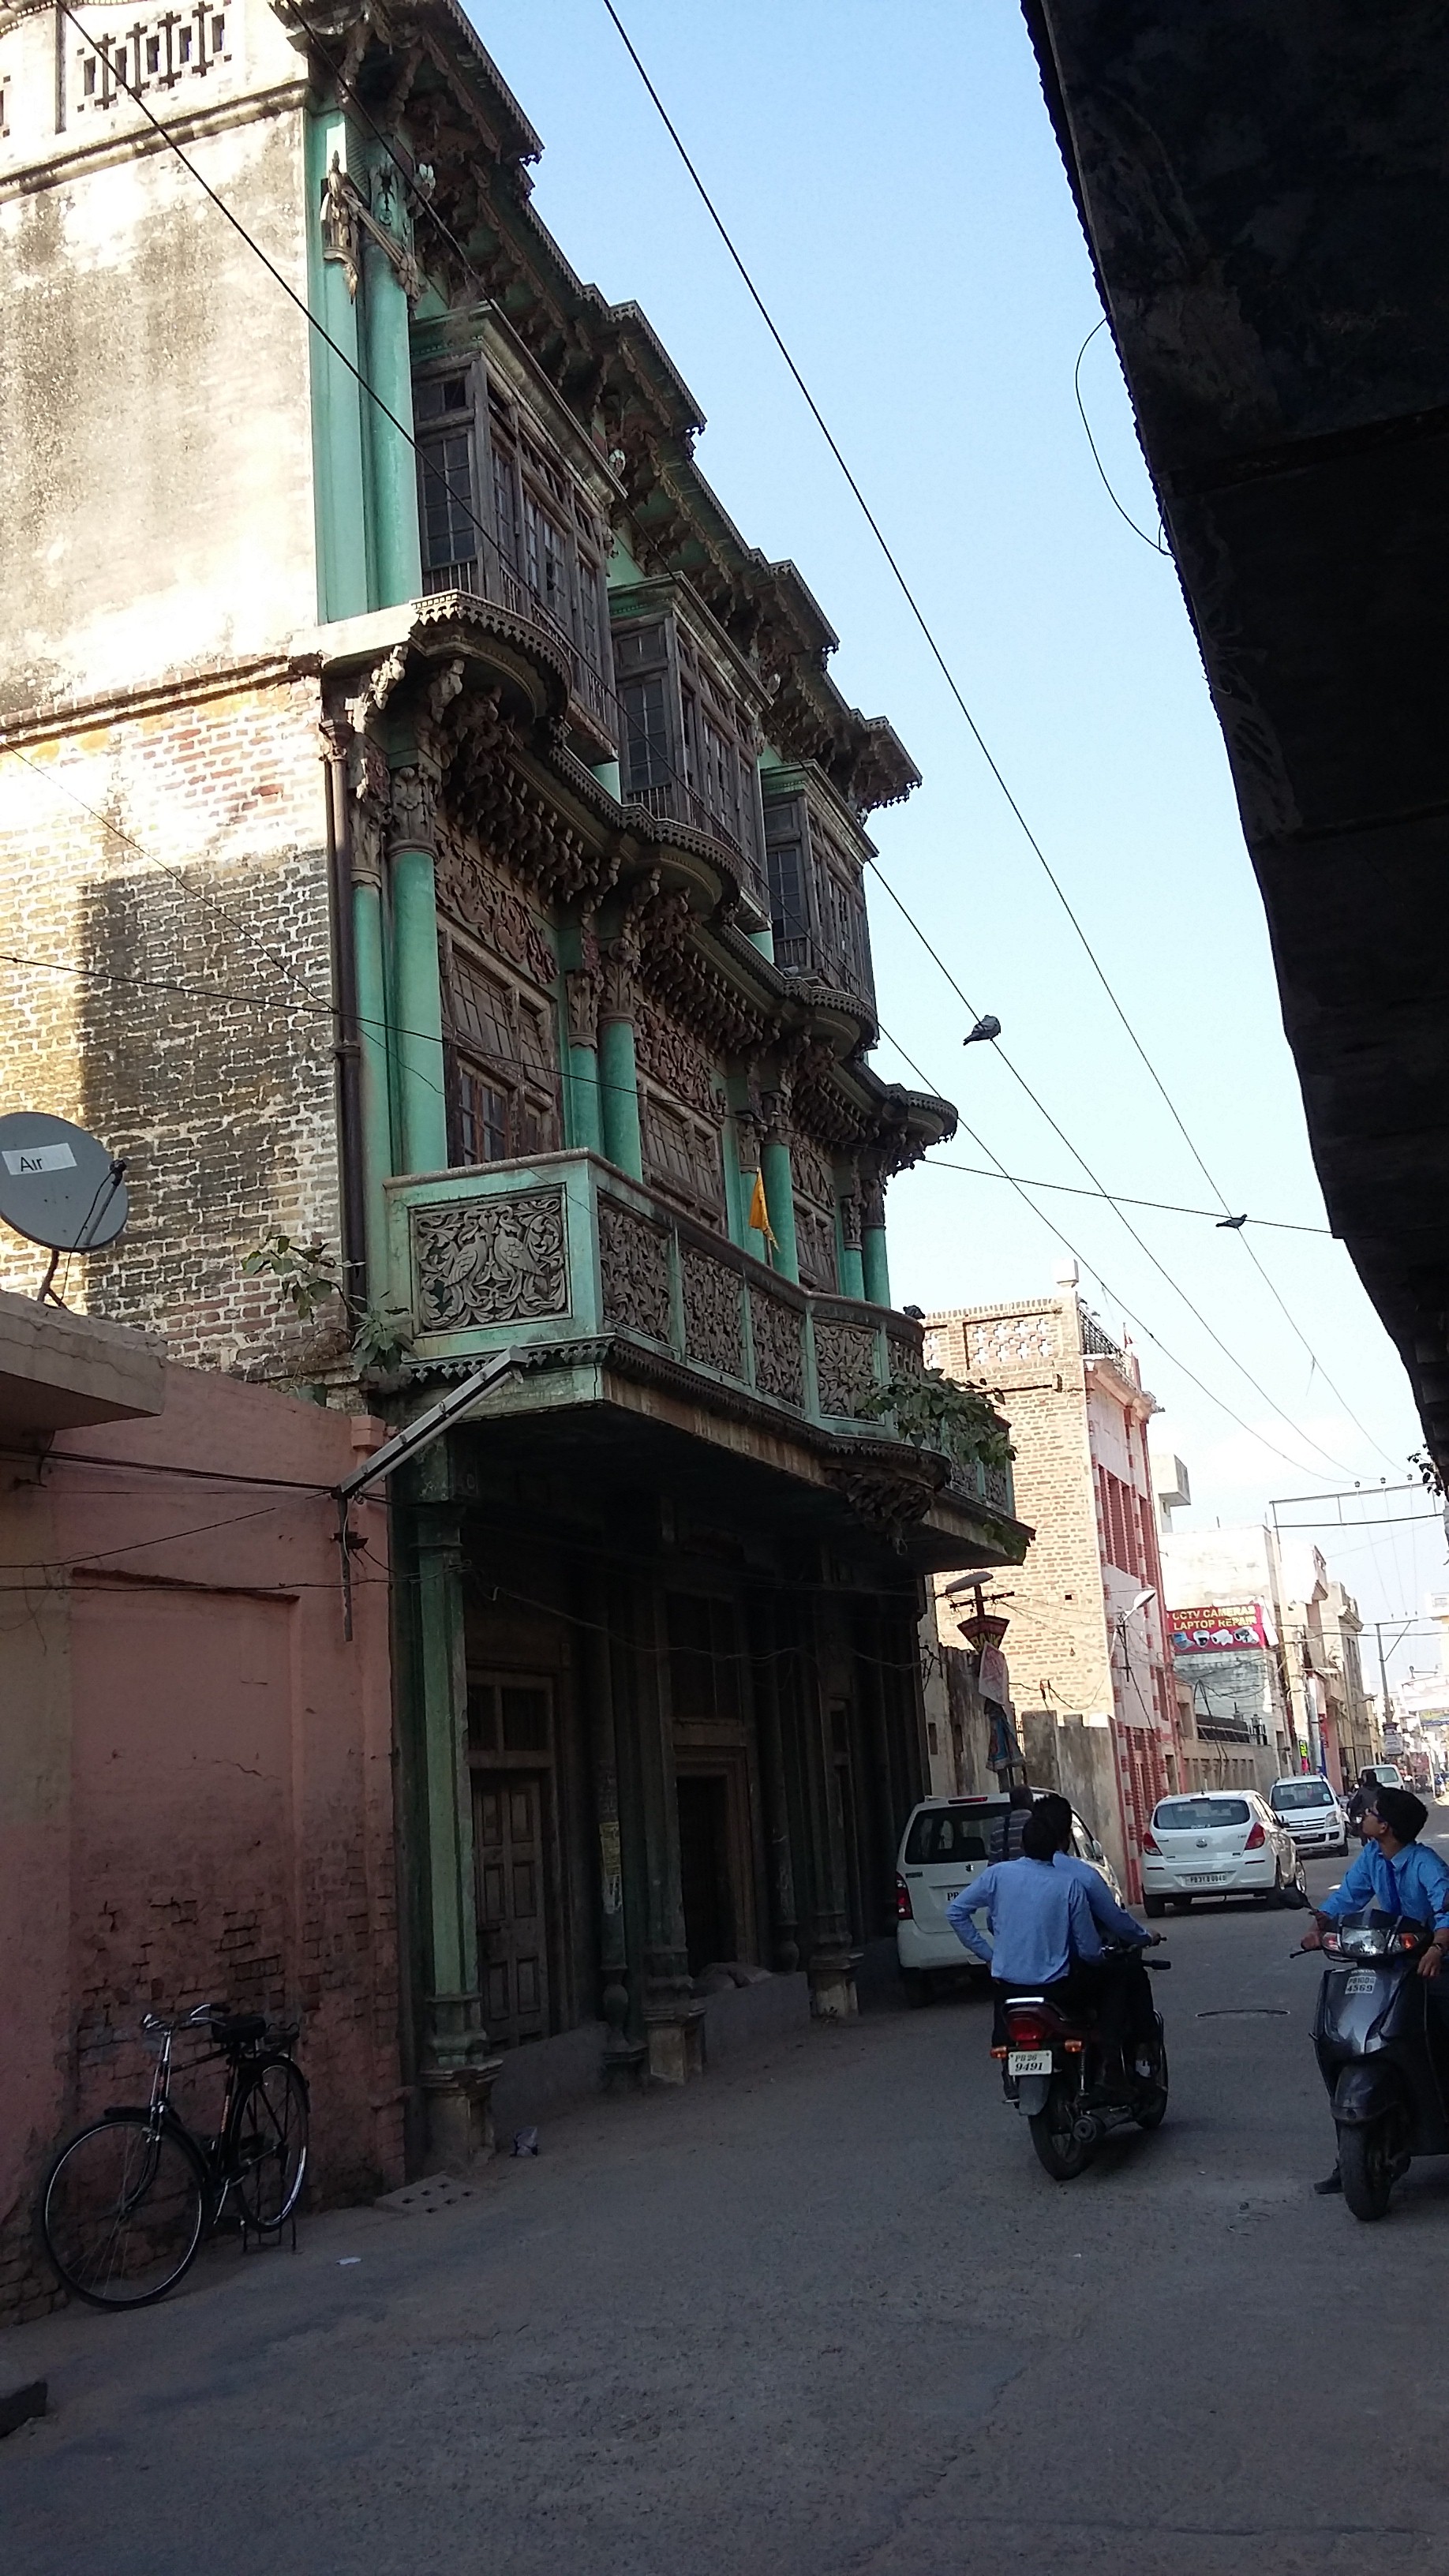 File:Old building in khanna city.jpg - Wikipedia